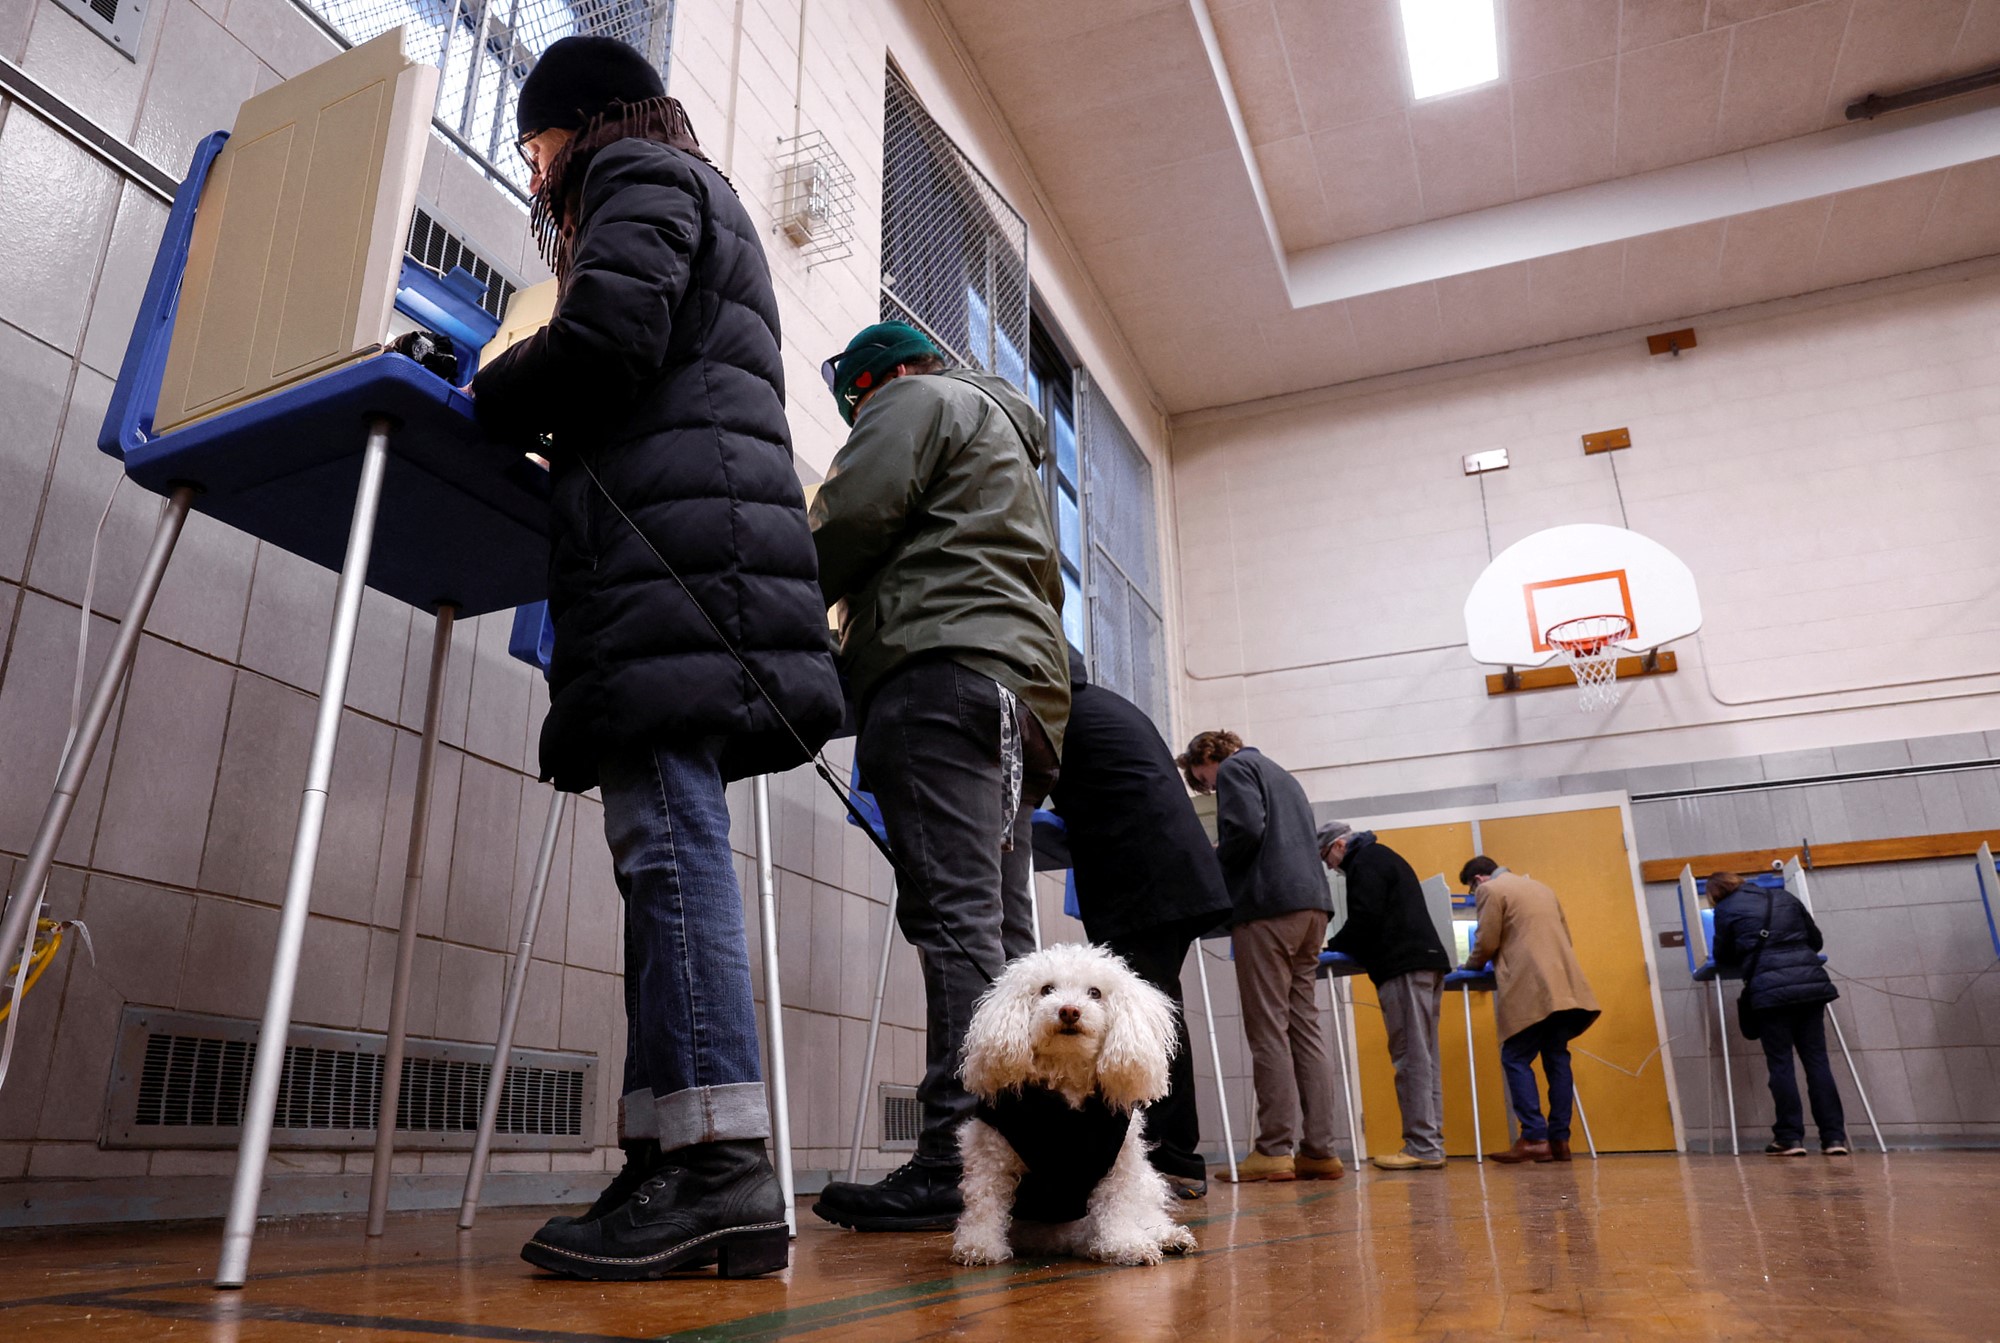 A little white dog waits near its owner as people vote.